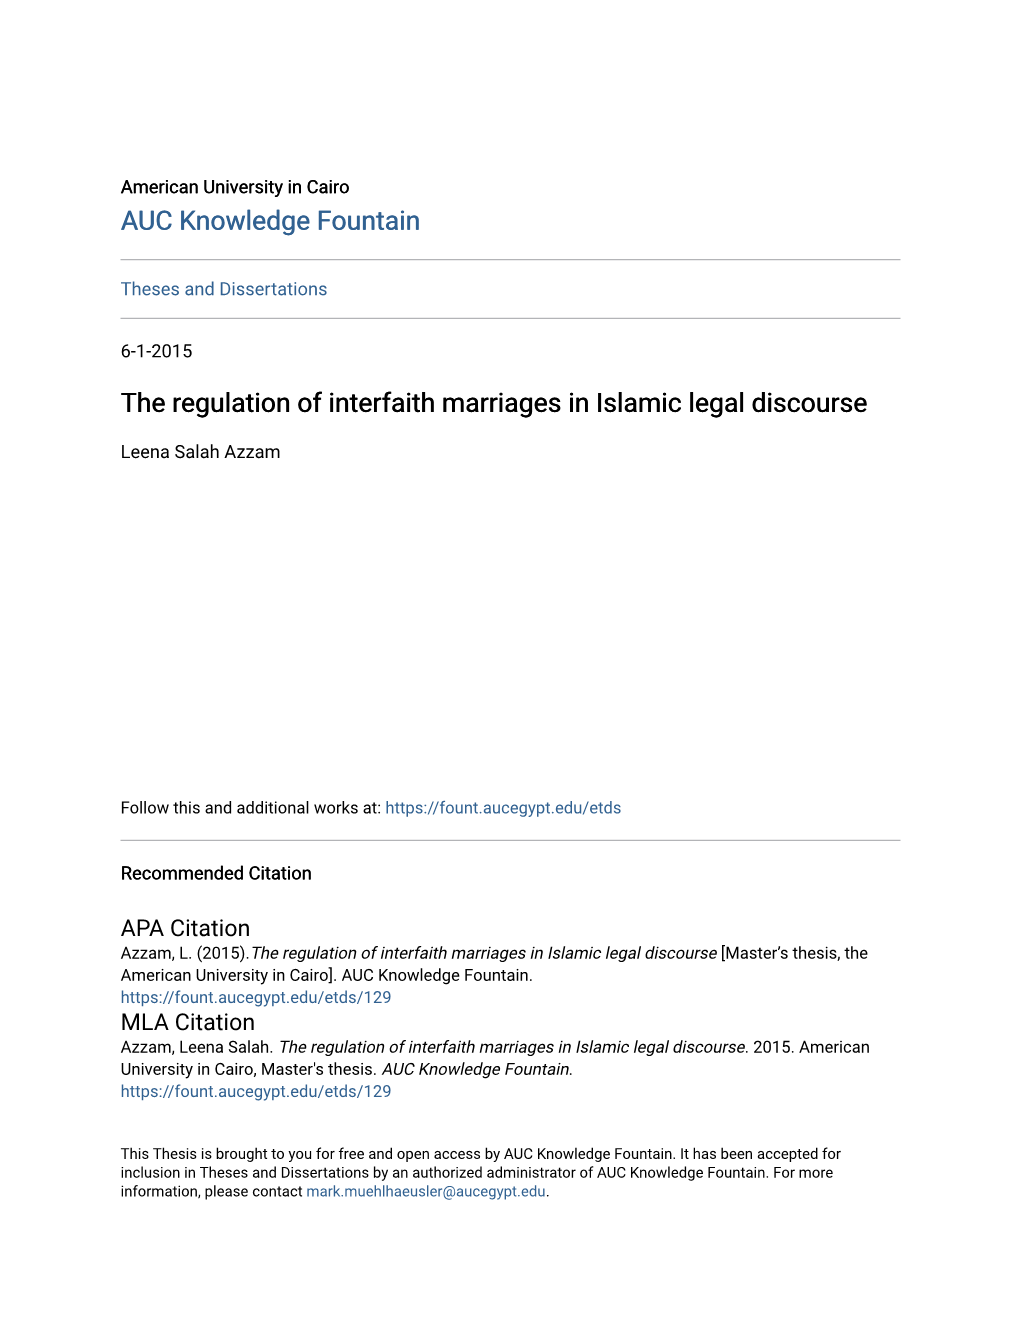 The Regulation of Interfaith Marriages in Islamic Legal Discourse